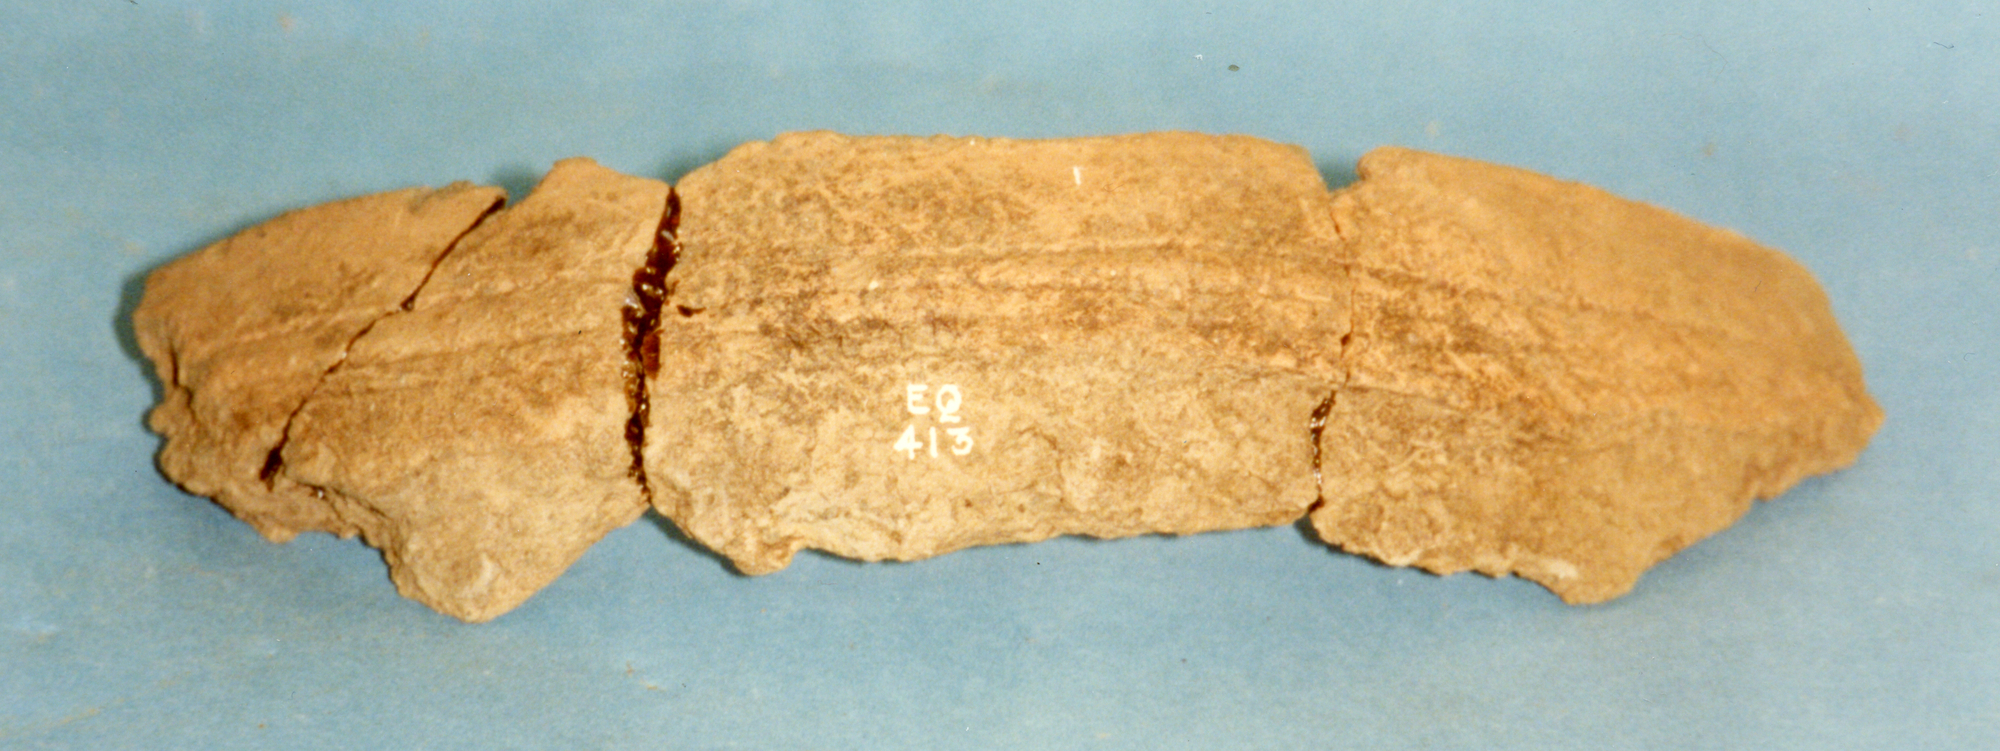 Image of Pottery / cinerary urn / sherd, from Drummelzier cairn, Peeblesshire © National Museums Scotland